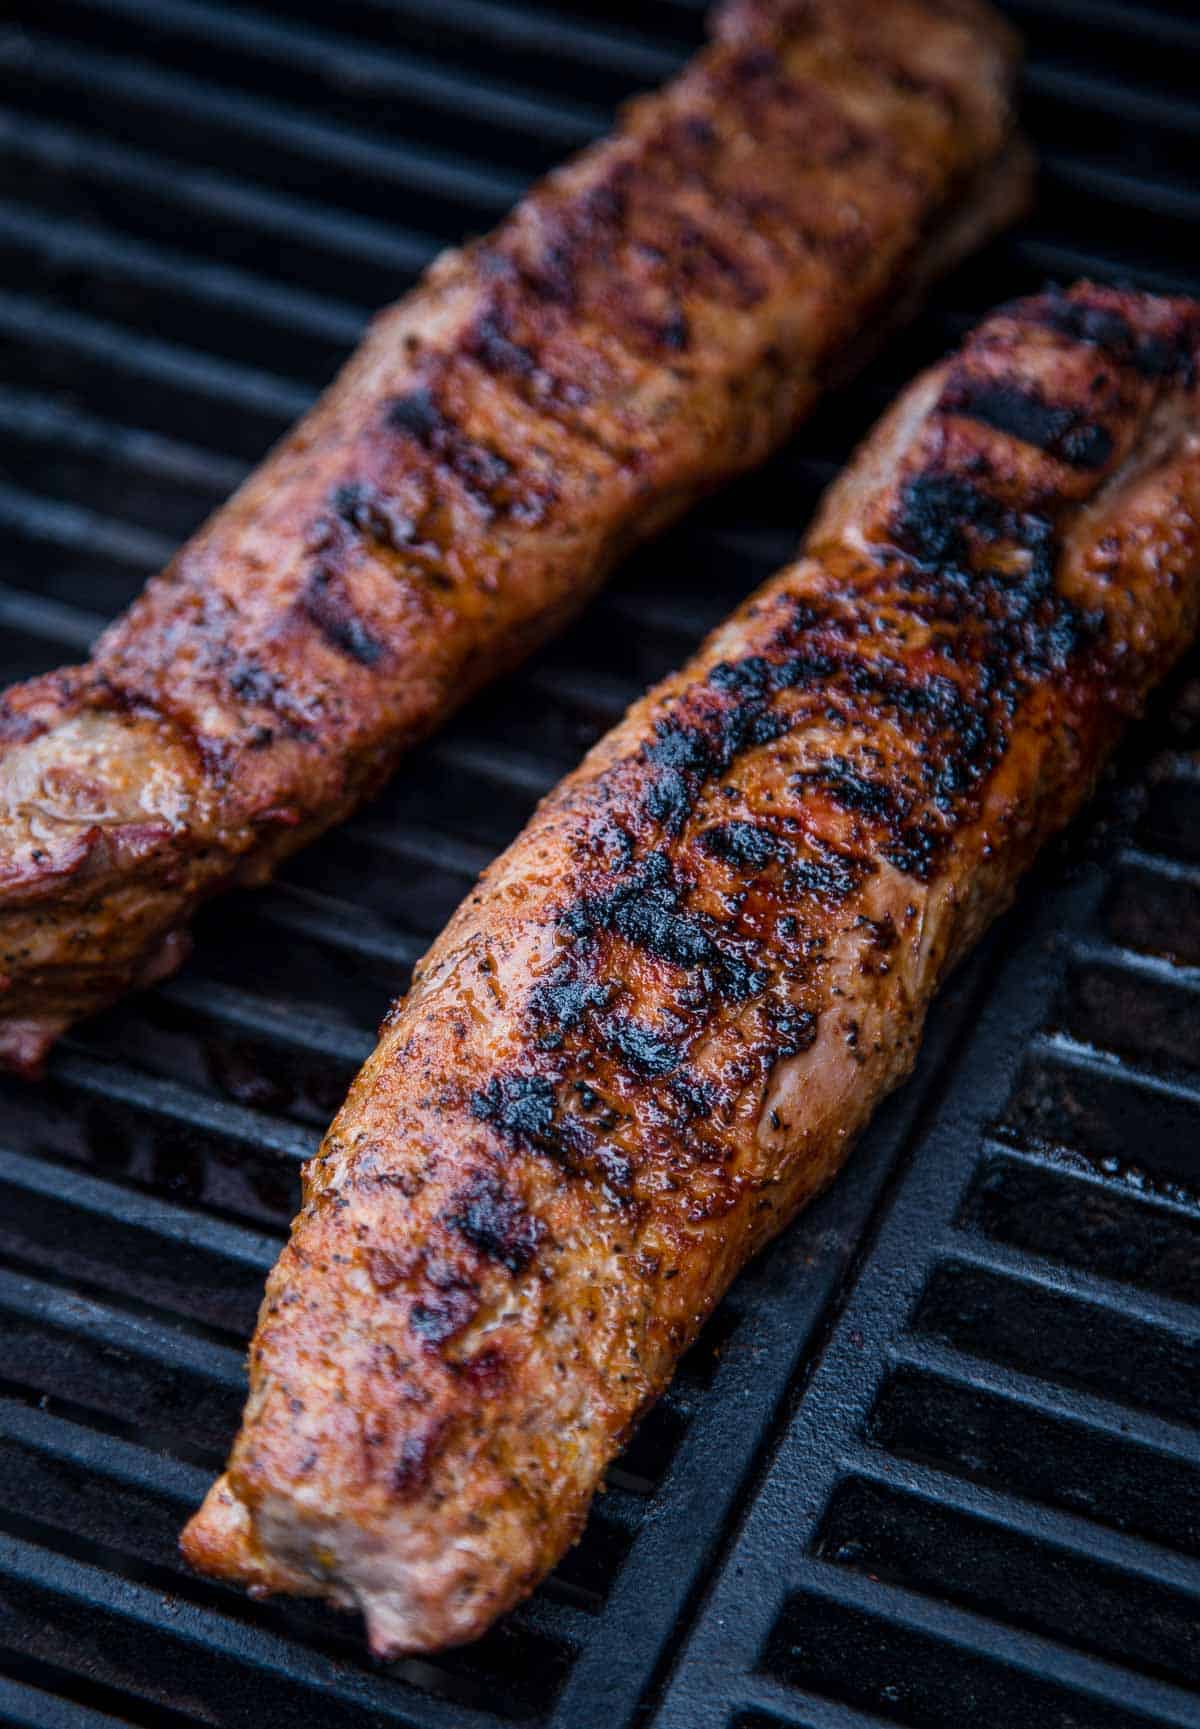 Two grilled pork tenderloins on a hot grill